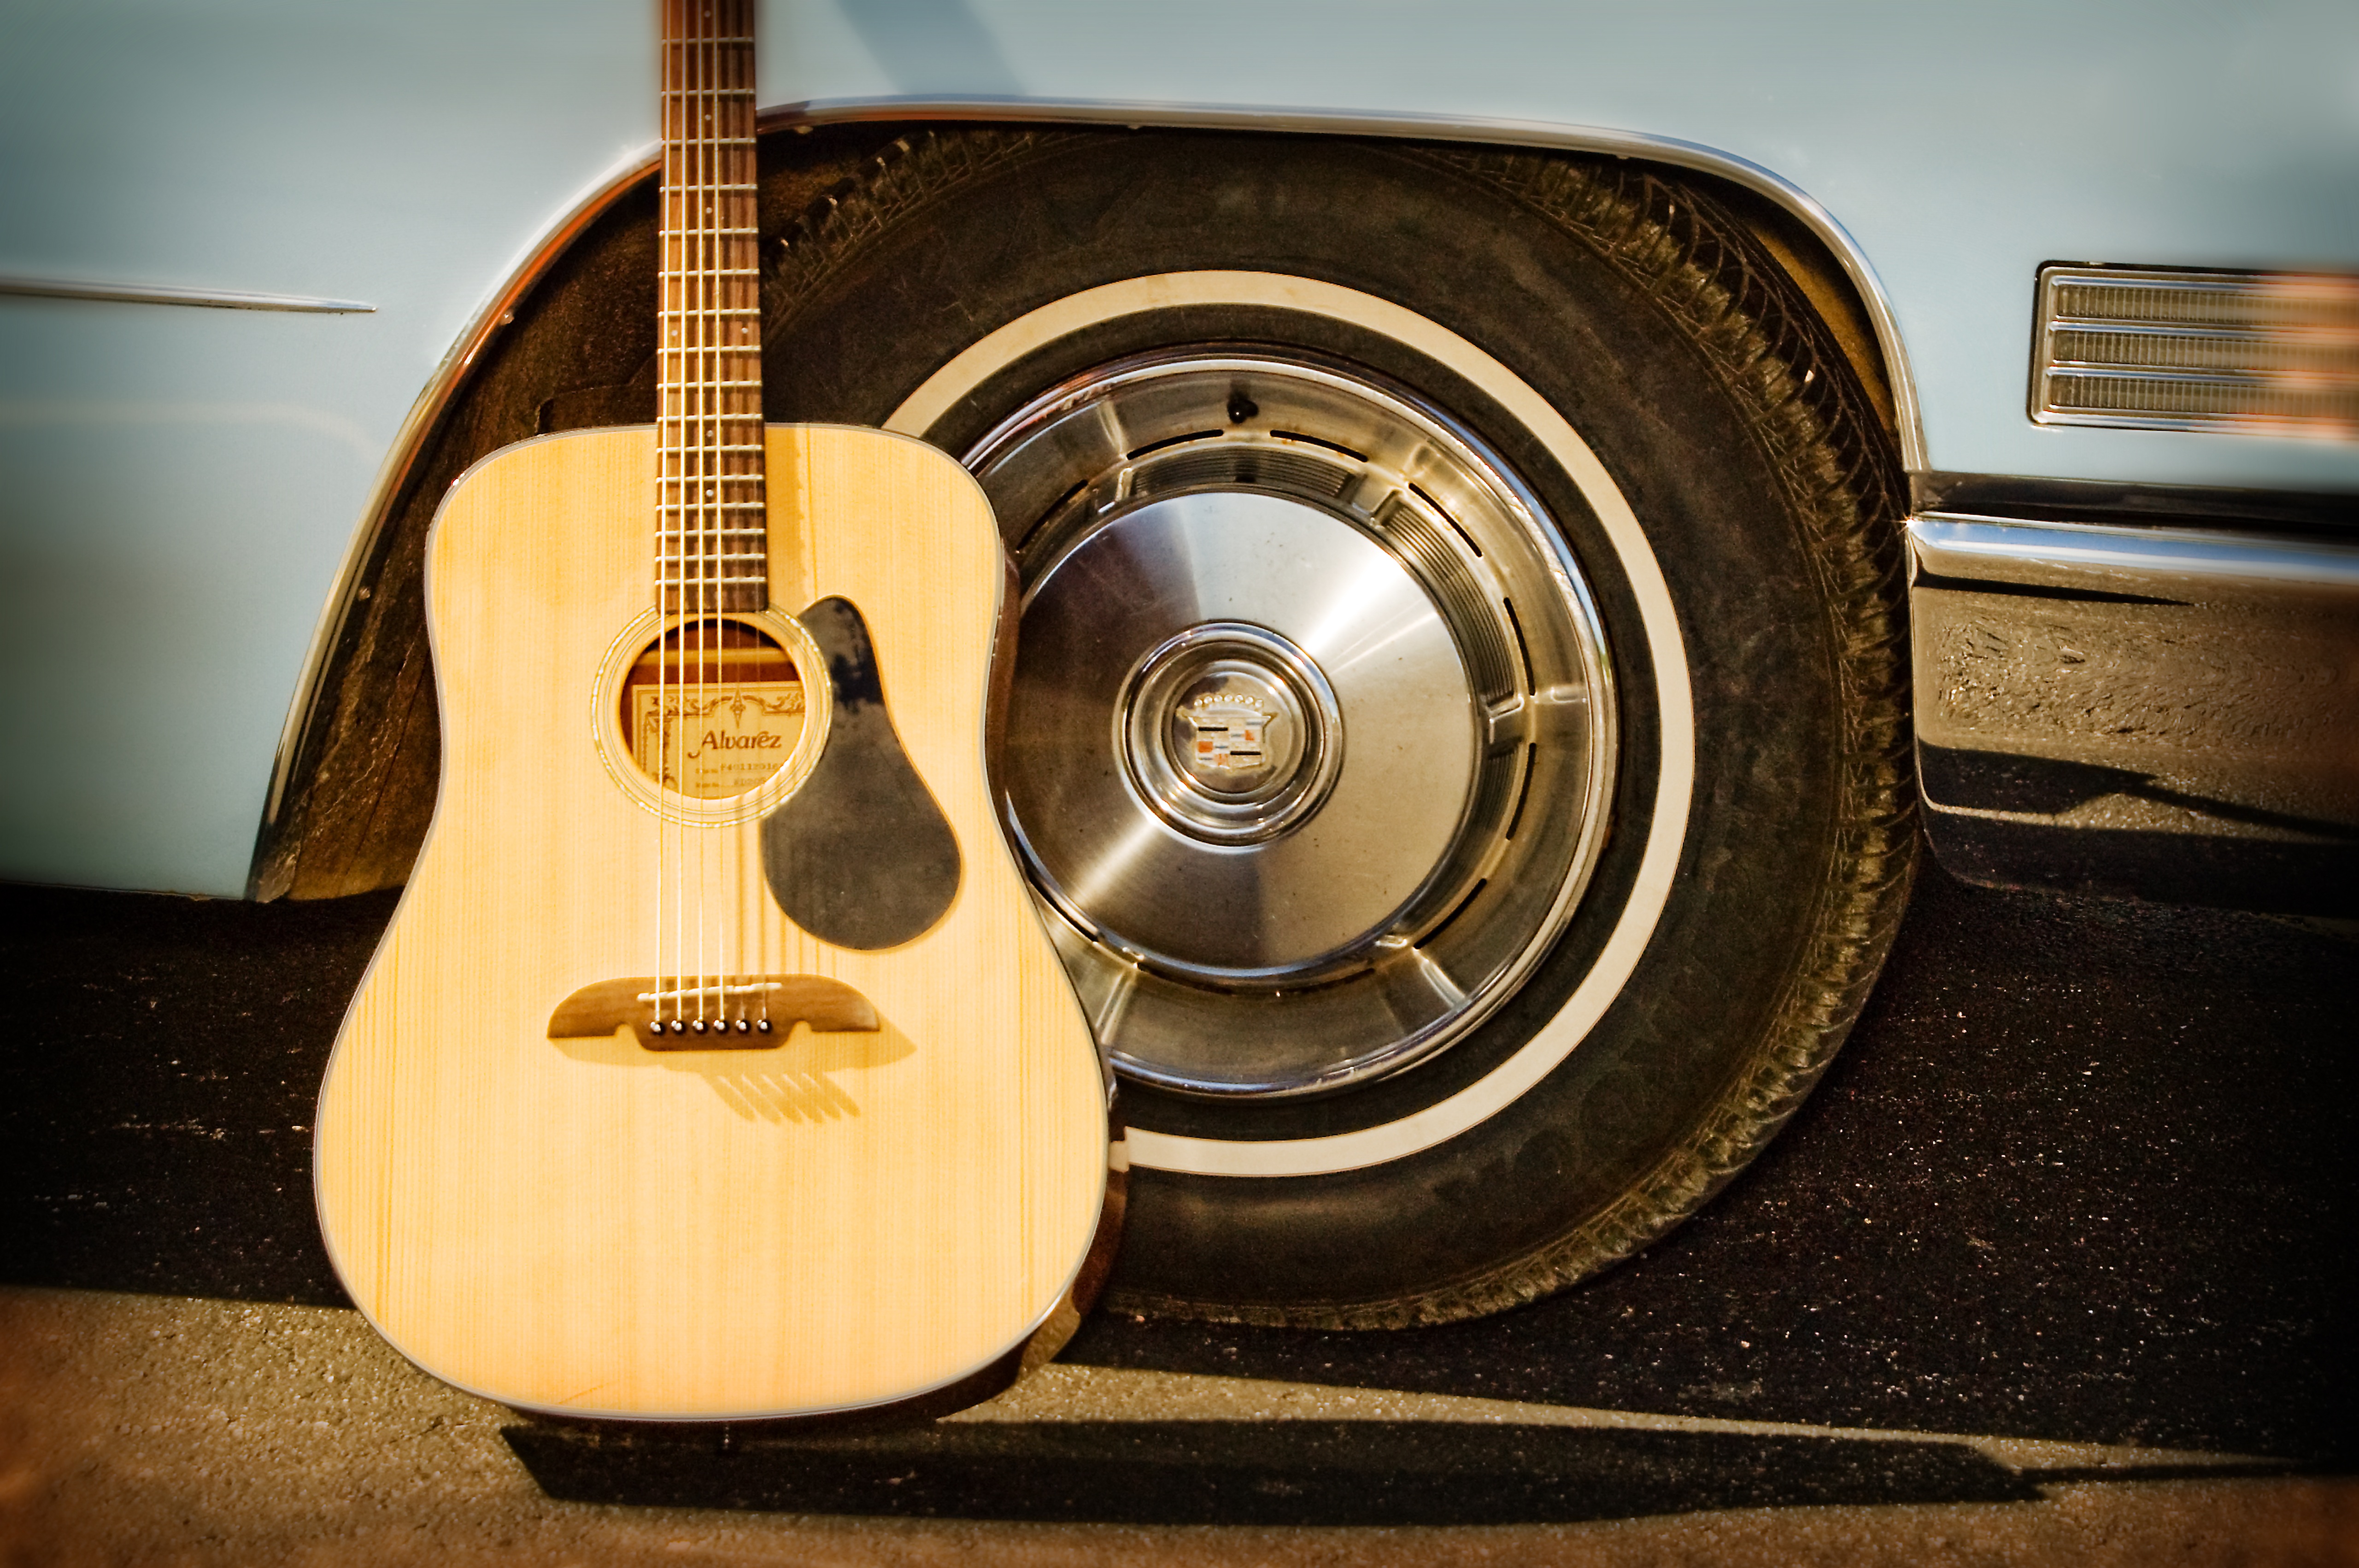 Acoustic guitar leaning up against a car tire by Lisa Johnson